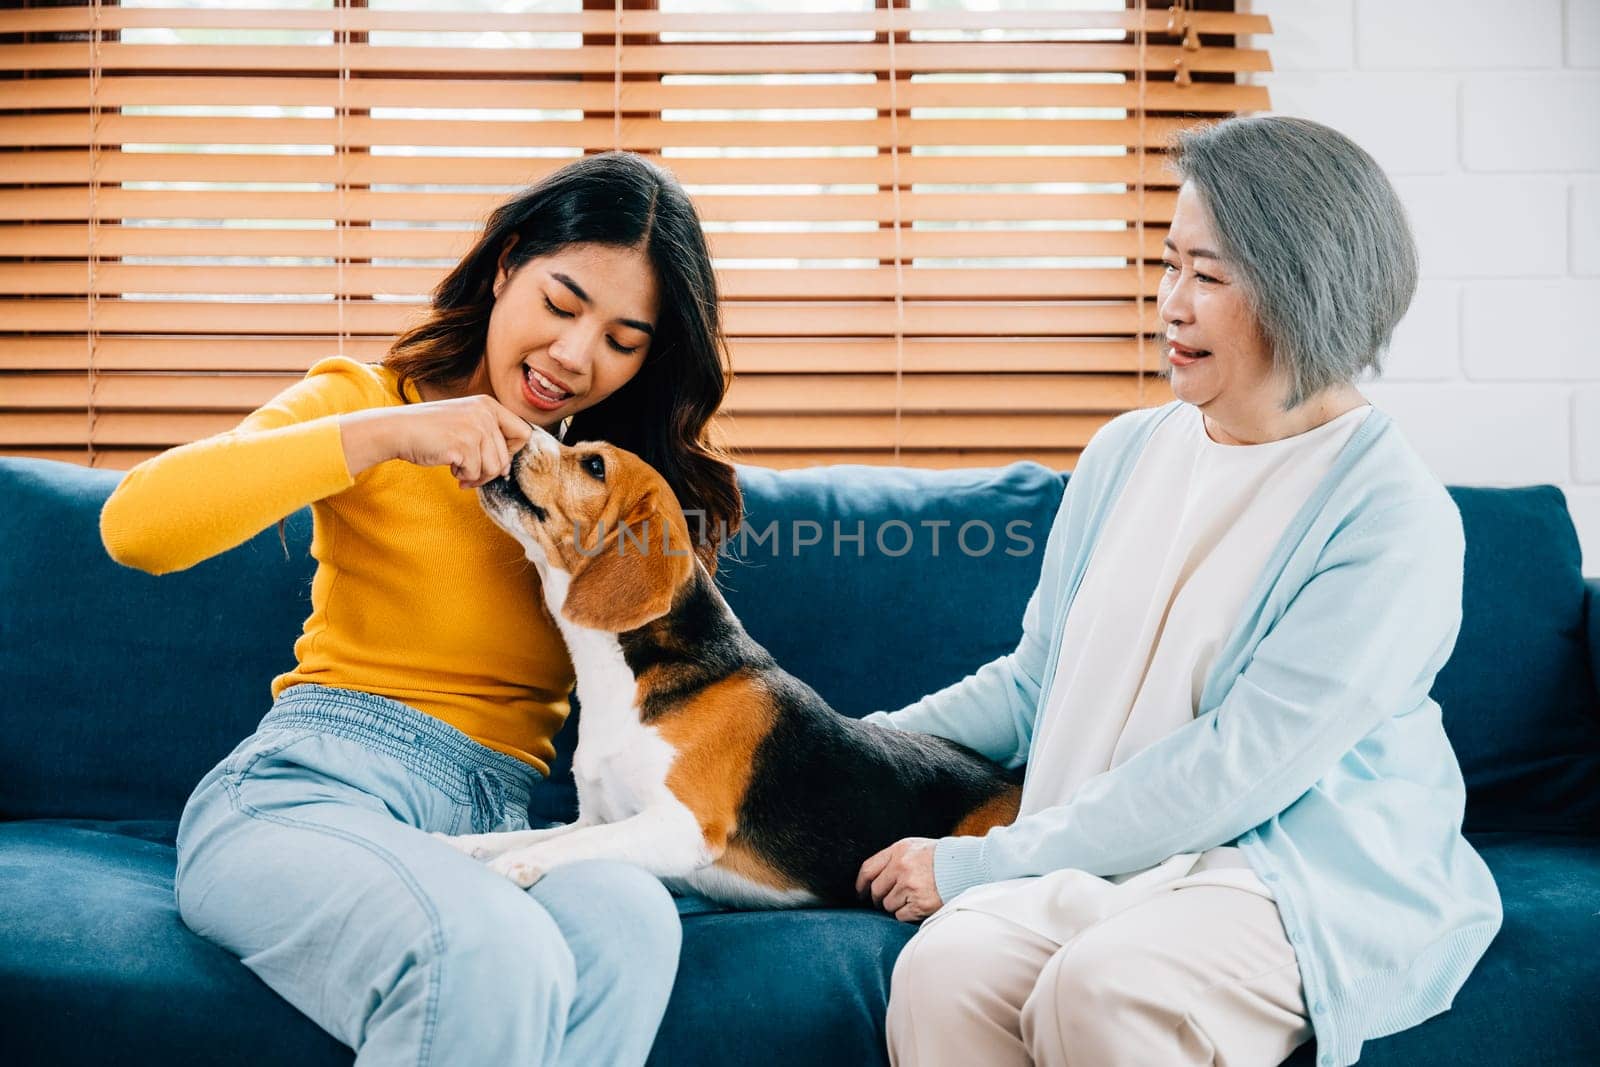 In a heartwarming family scene, a woman and her mother care for their Beagle dog on the sofa at home. Their smiles reveal the happiness and loyalty that define their family relationships. by Sorapop